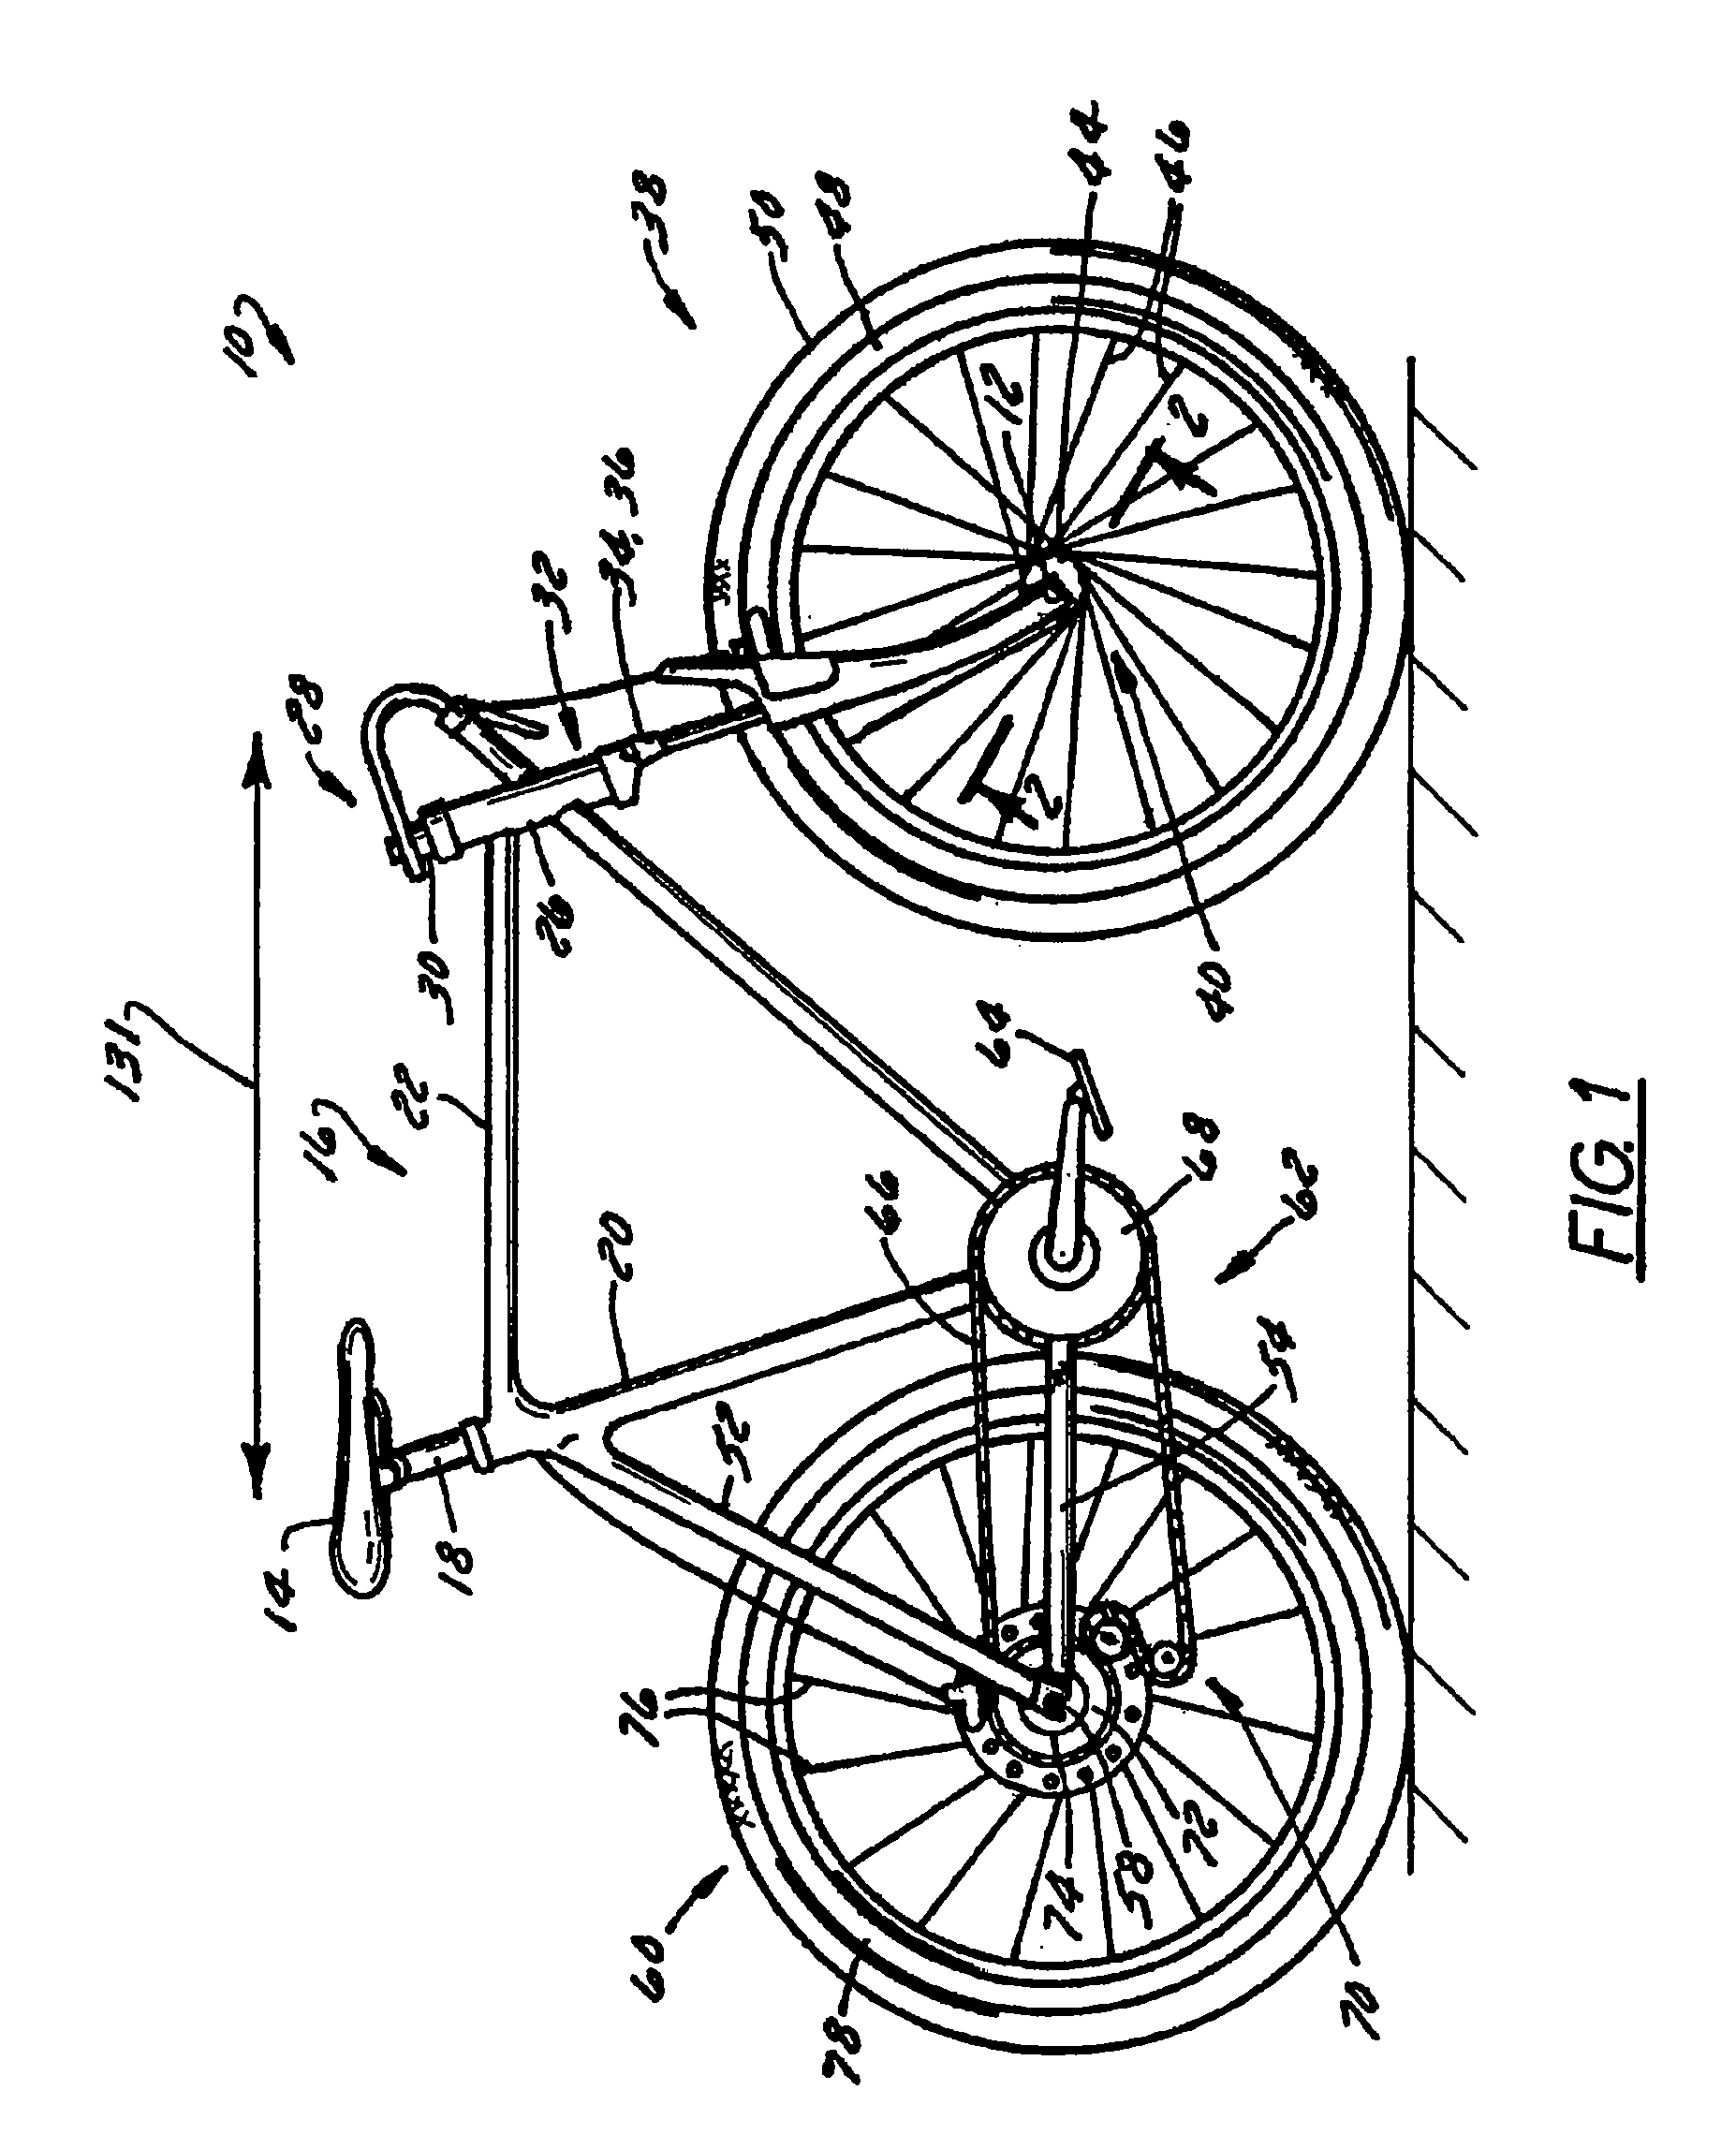 Bicycle wheel quick release assembly